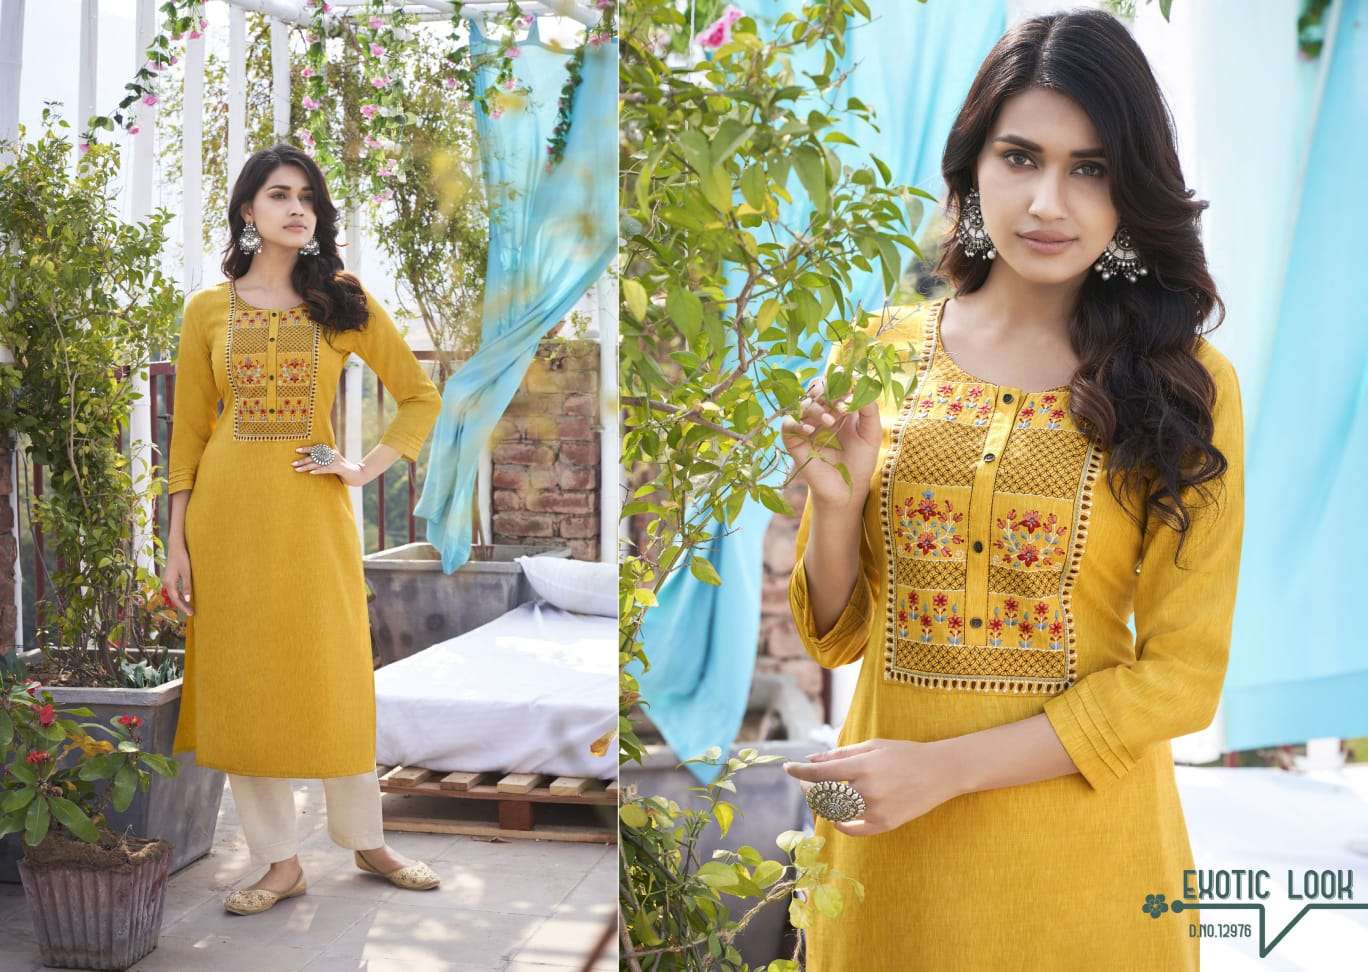 KALAROOP PRESENTS LYCHEE VOL 3 RAYON WITH EMBROIDERY WHOLESALE